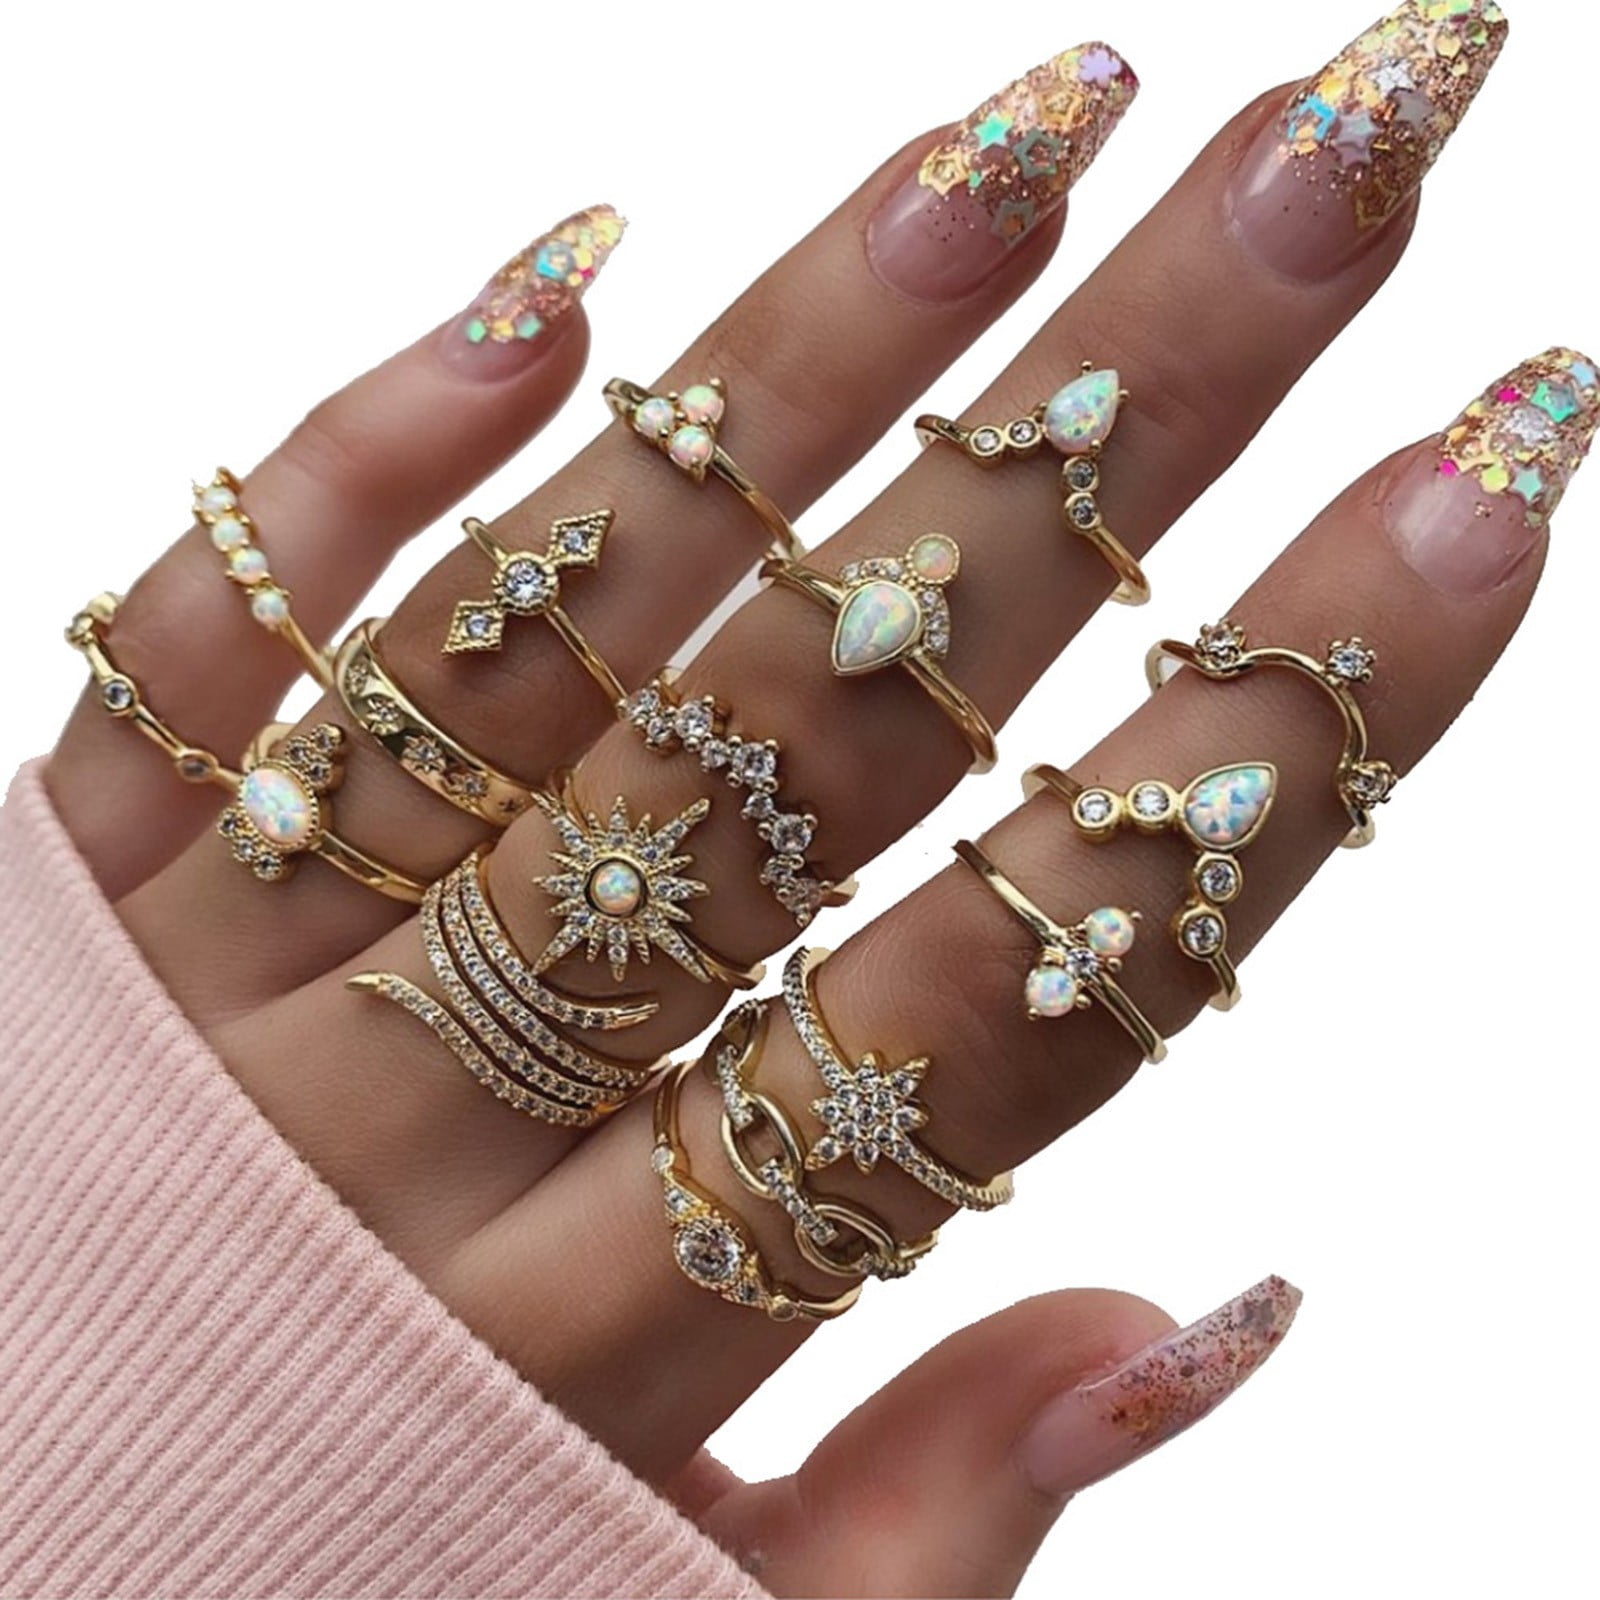 rings for women，rings for teen girls，stackable rings for women，cute  rings，22-piece multi-joint ring set with a niche design - Walmart.com